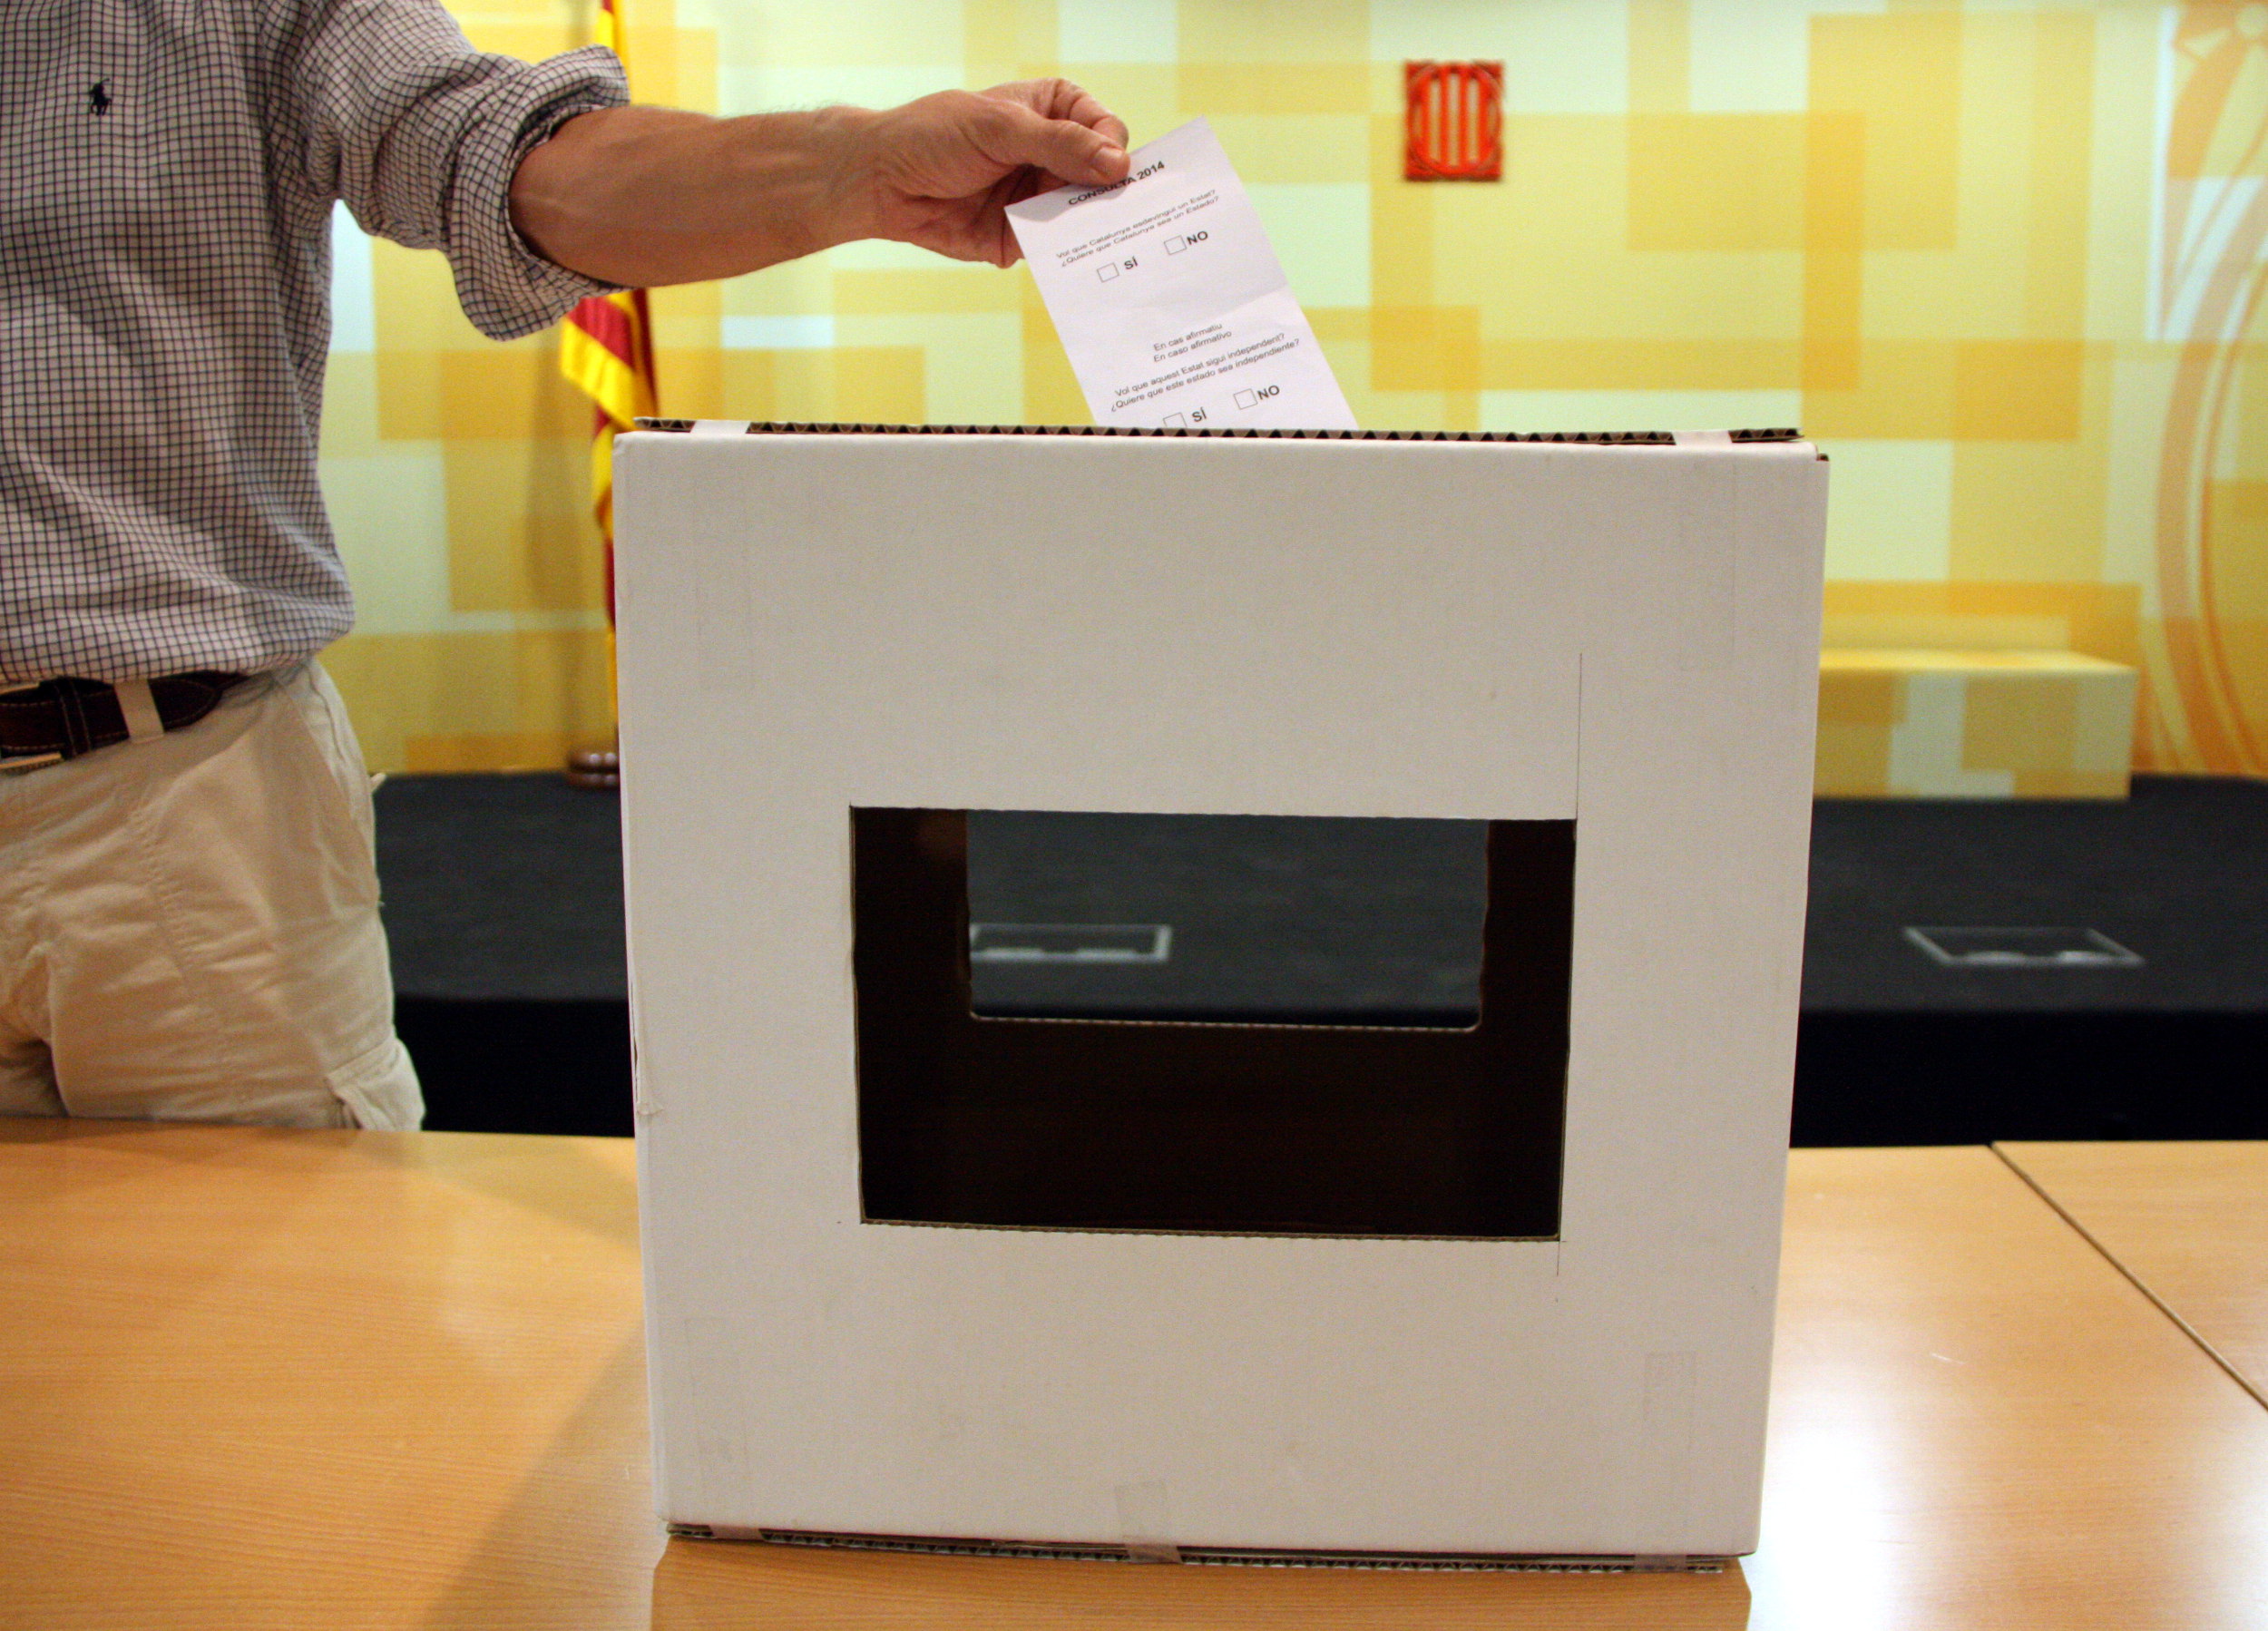 Image of the ballot boxes used on the 9th of November symbolic vote on independence, in 2014